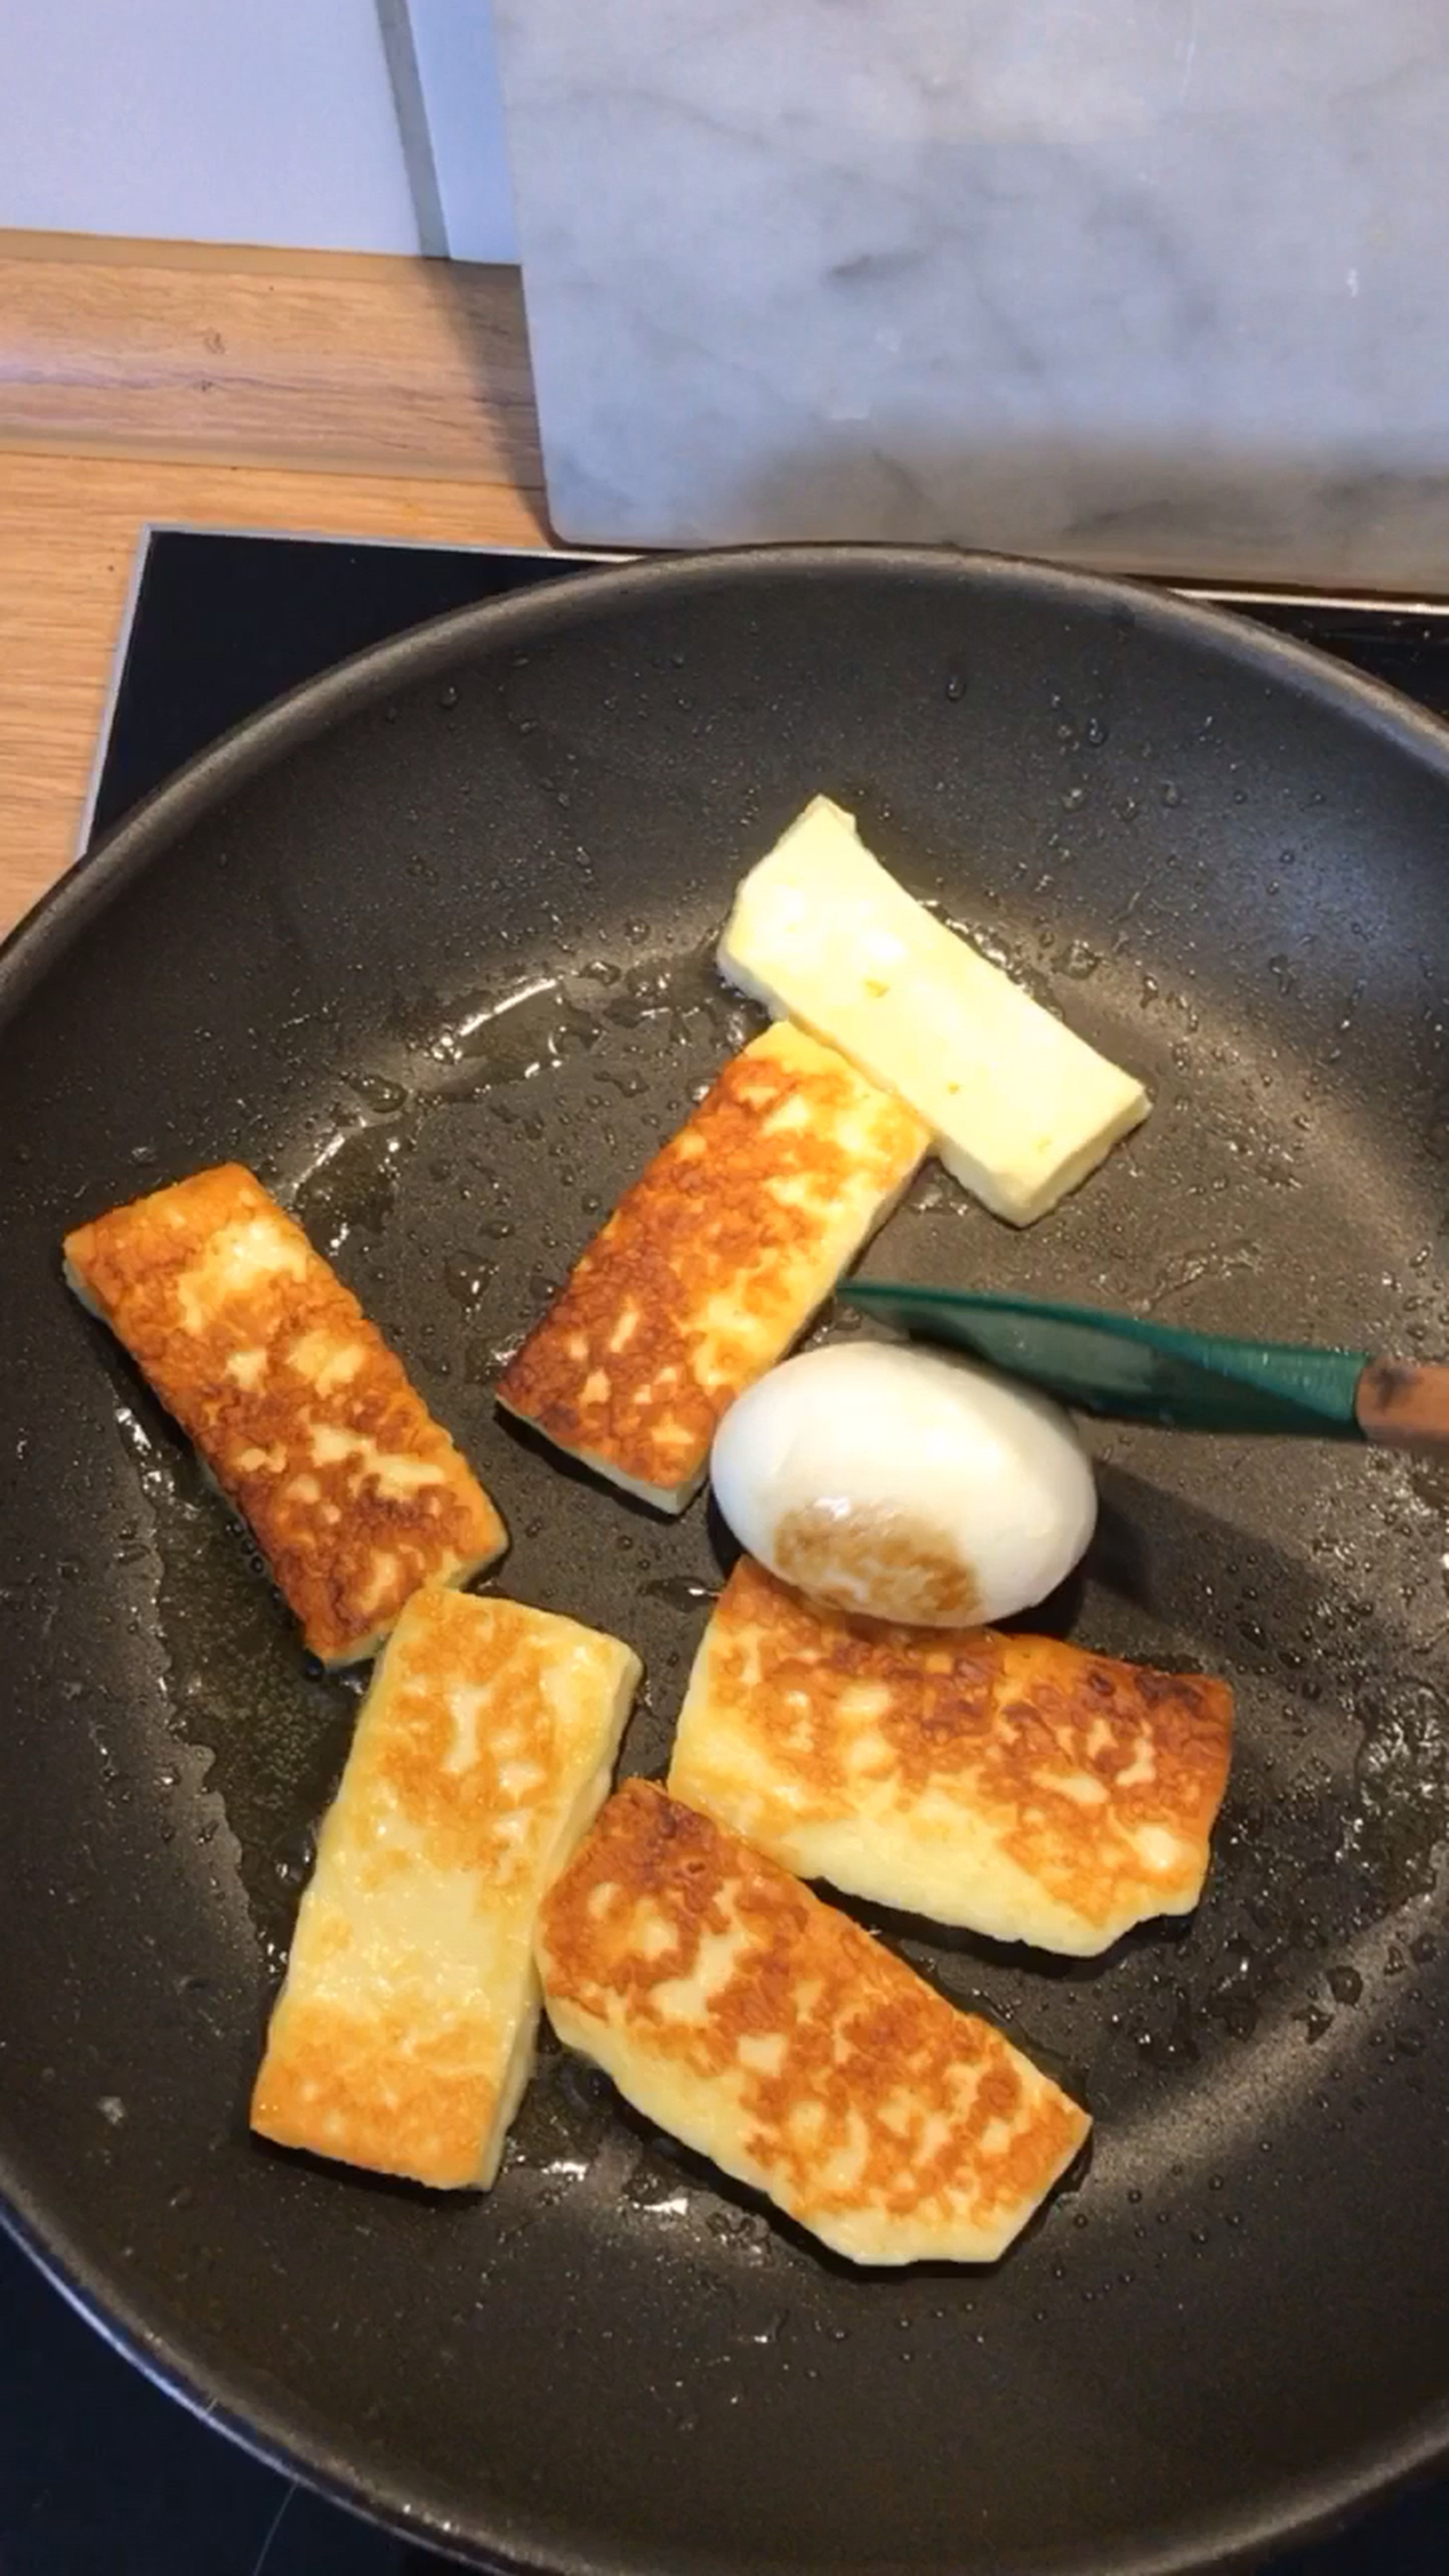 Fry halloumi and boiled eggs (7 min eggs) in the pan.